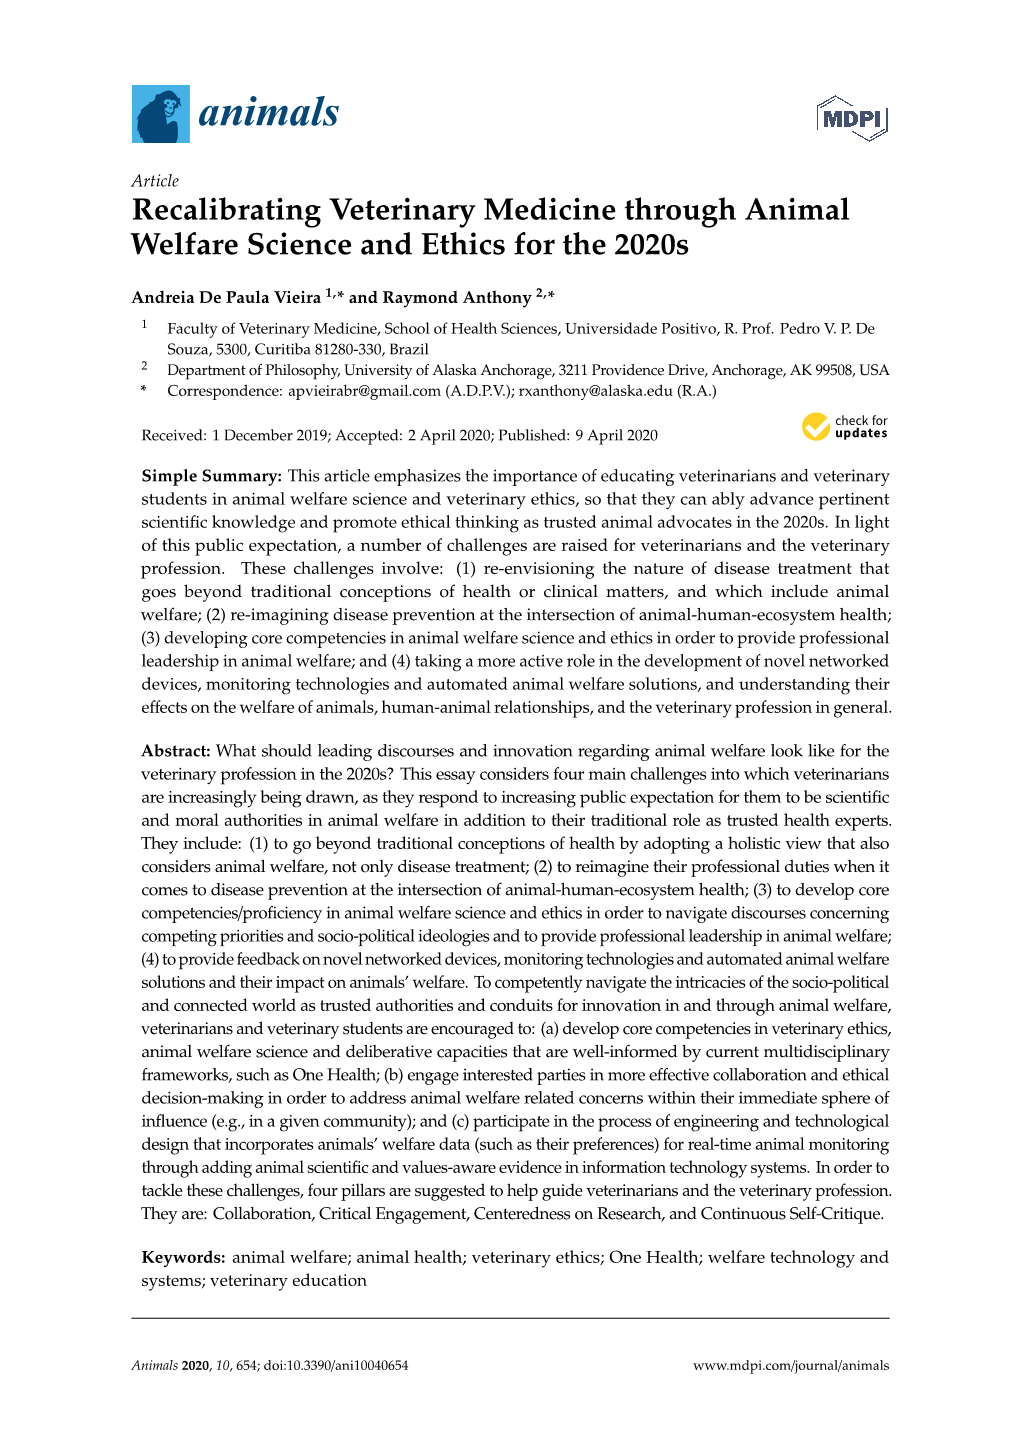 Recalibrating Veterinary Medicine Through Animal Welfare Science and Ethics for the 2020S